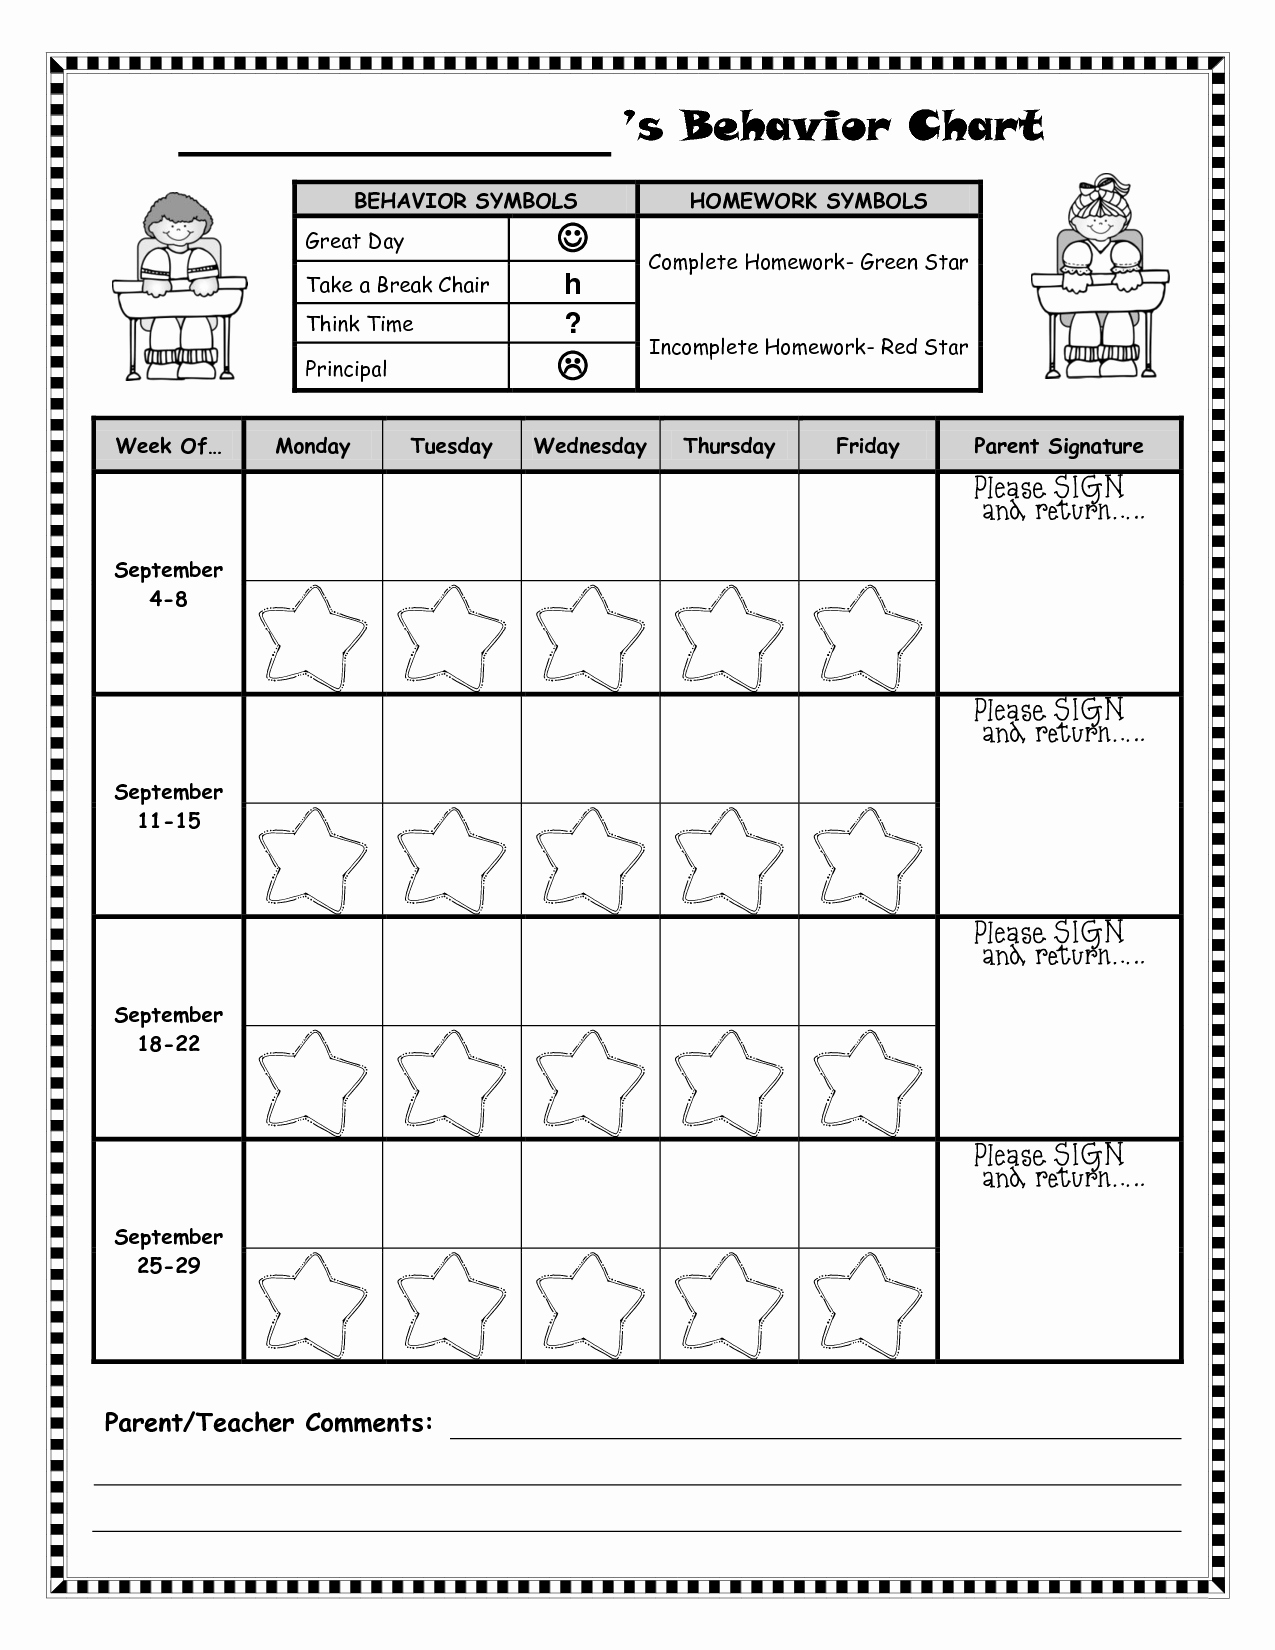 Daily Behavior Chart Template New 4 Best Of Star Behavior Chart Child Behavior